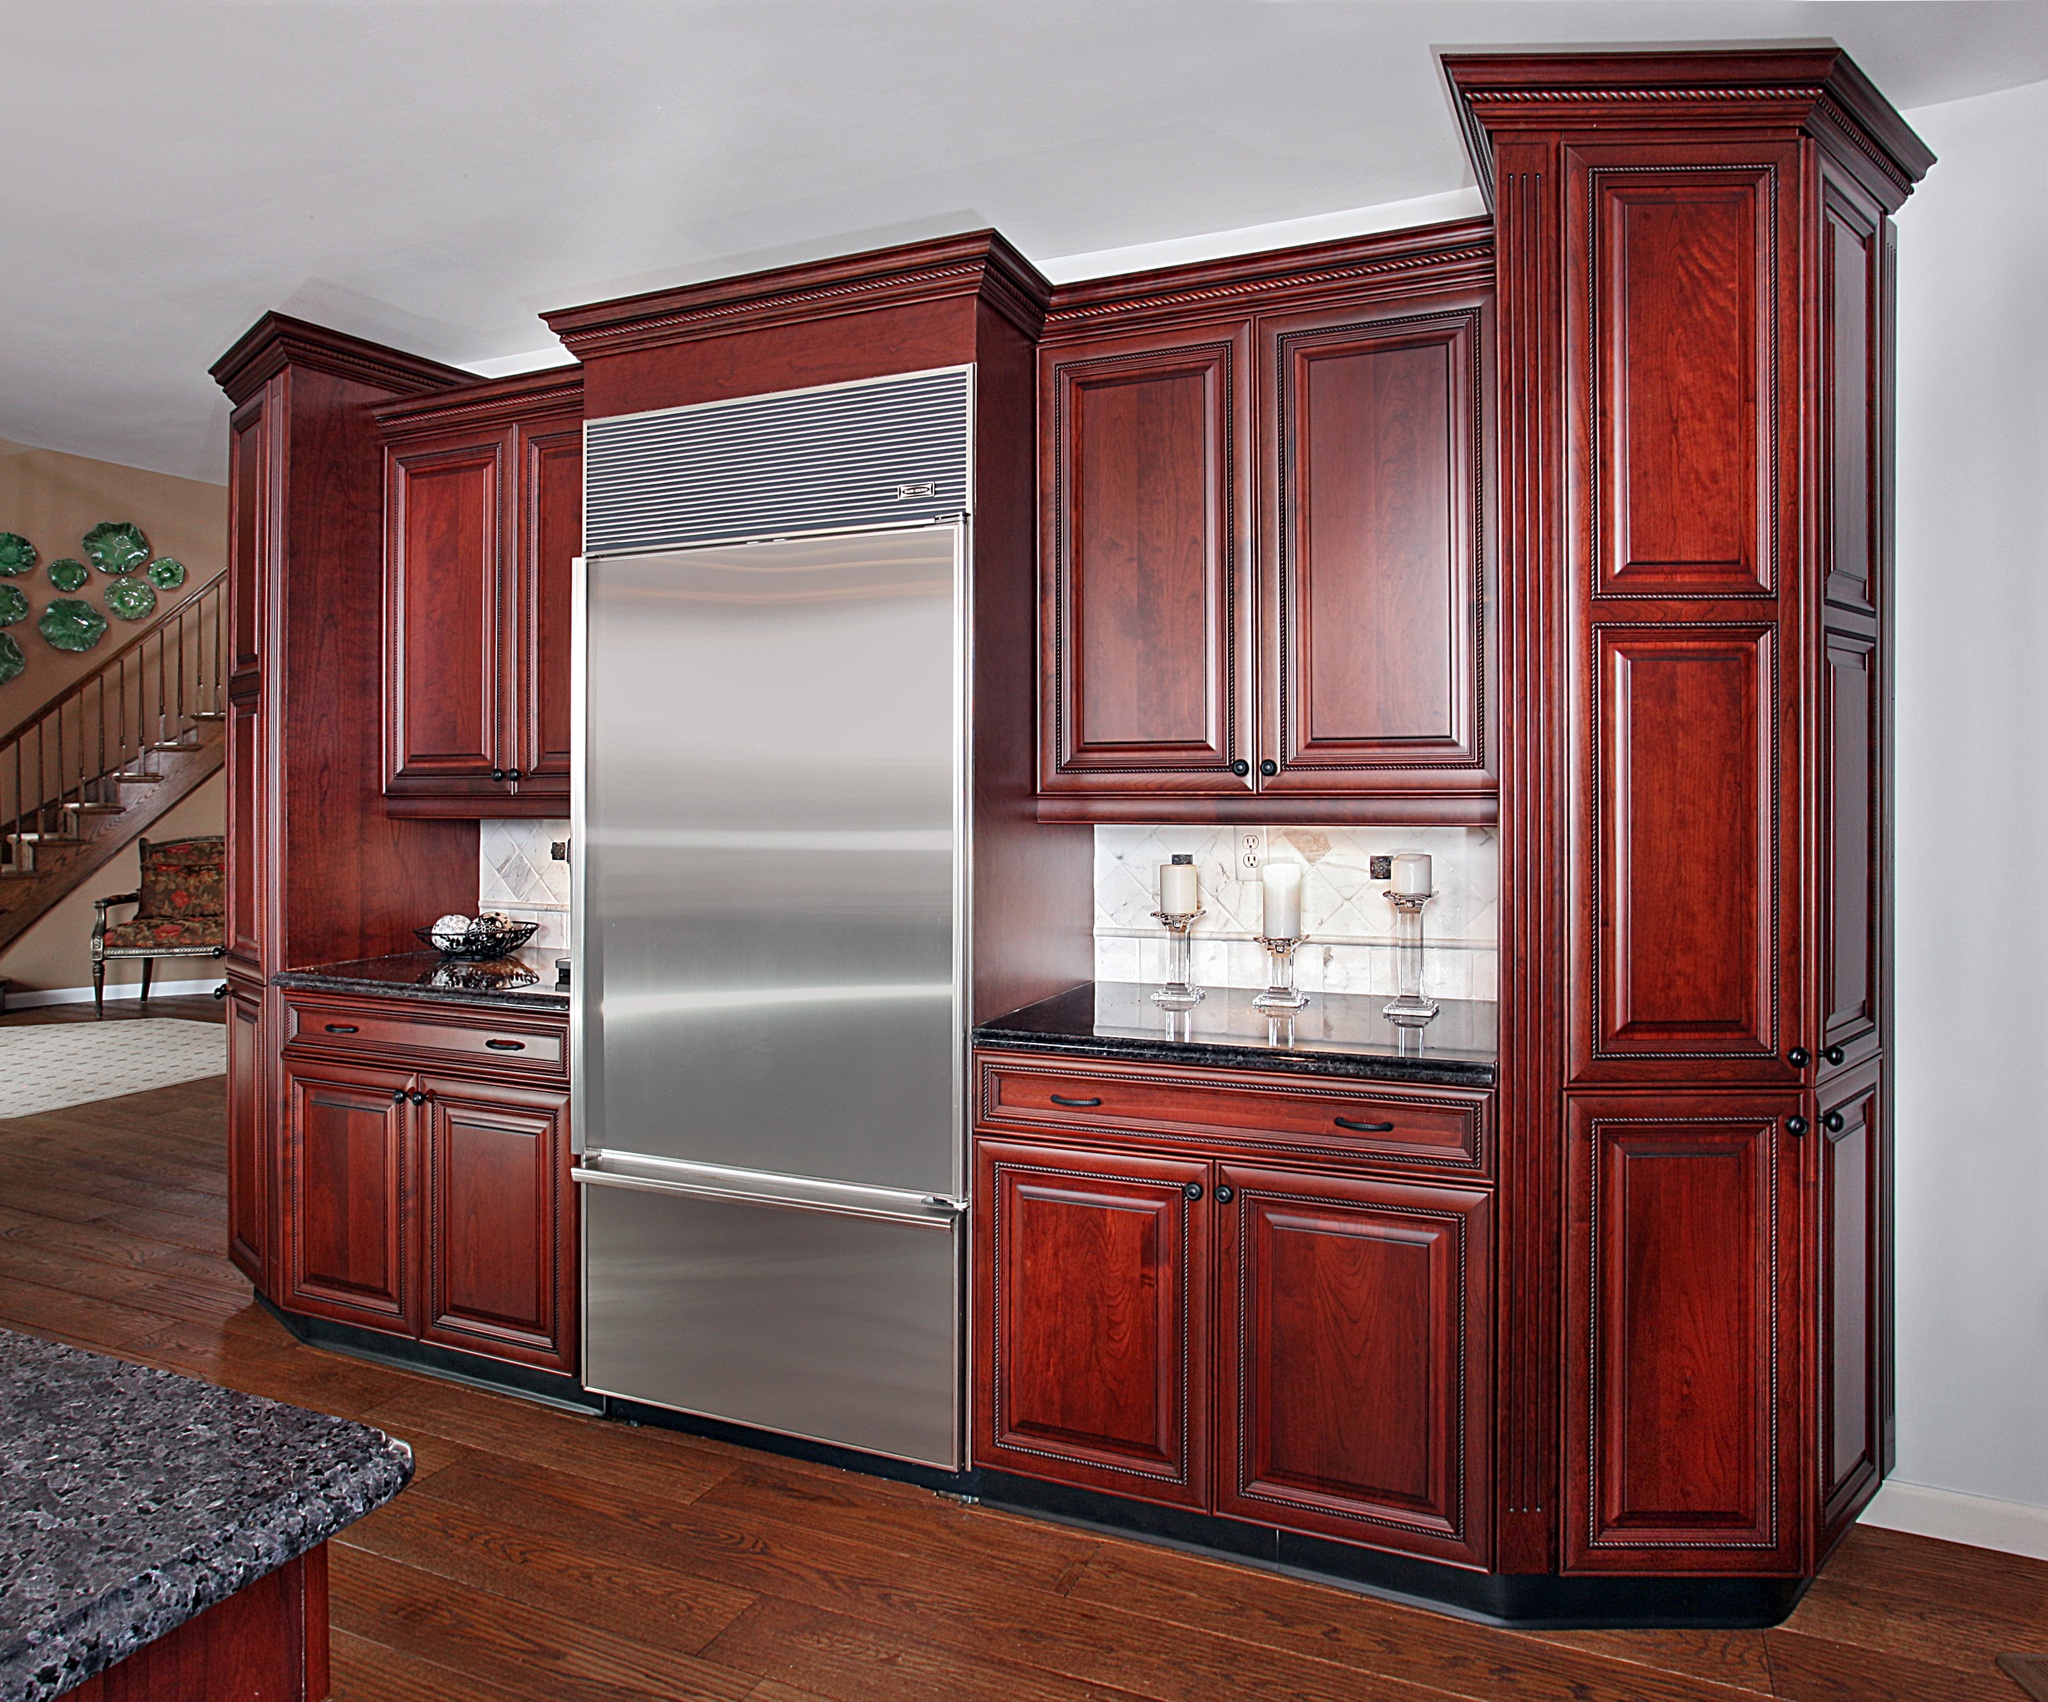 stepped crown molding pantry